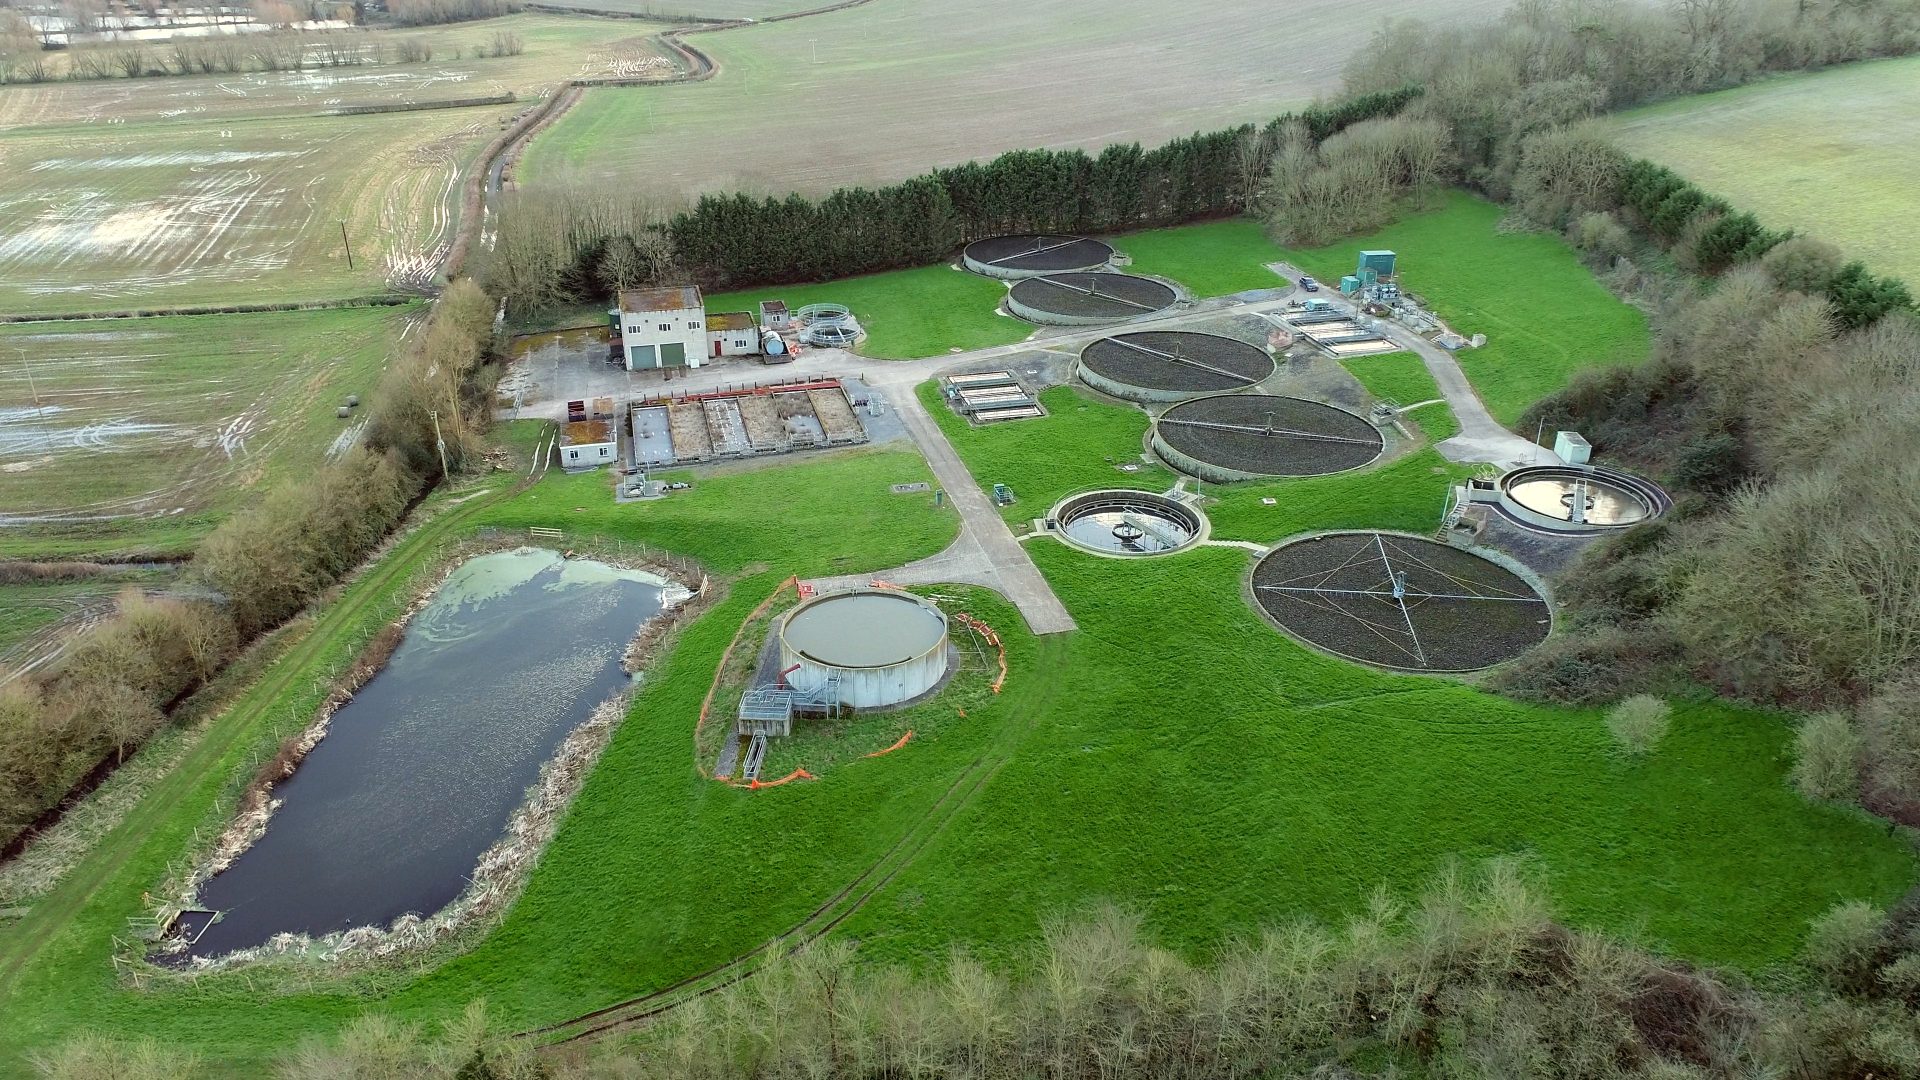 More than £5 million is being invested in the water recycling centre at Somerton.